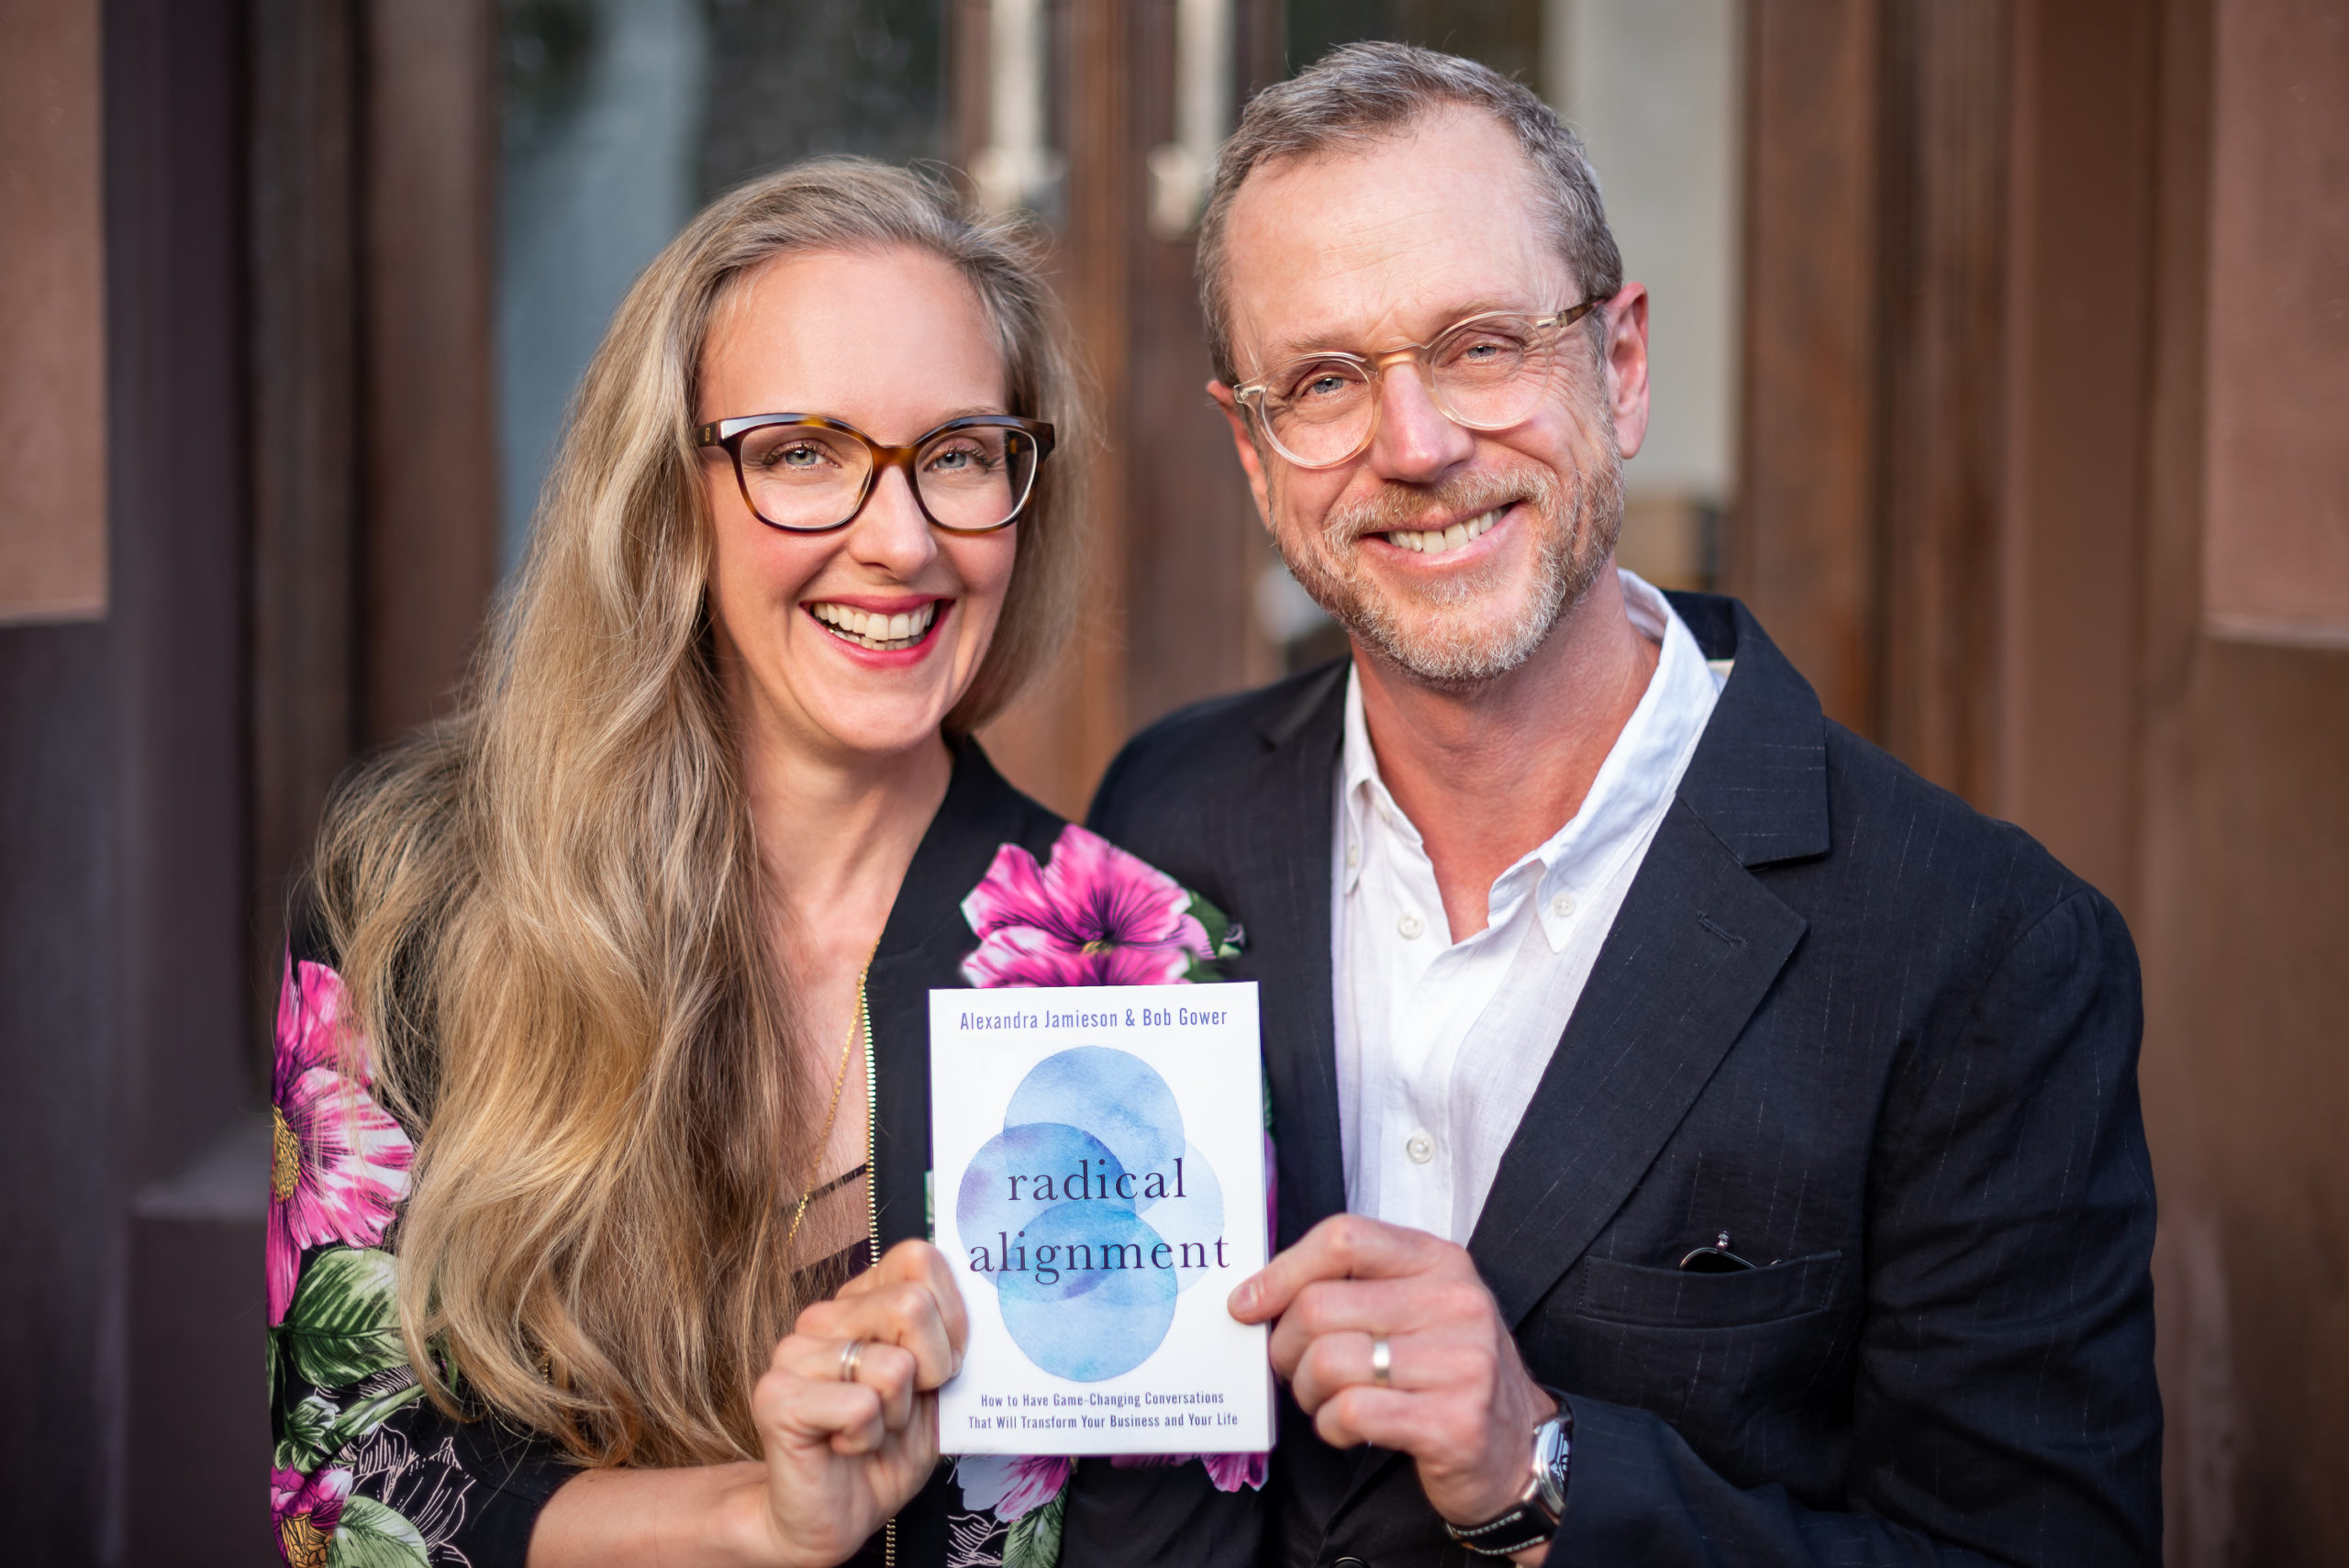 Alexandra Jamieson and Bob Gower hold a copy of their new book, Radical Alignment